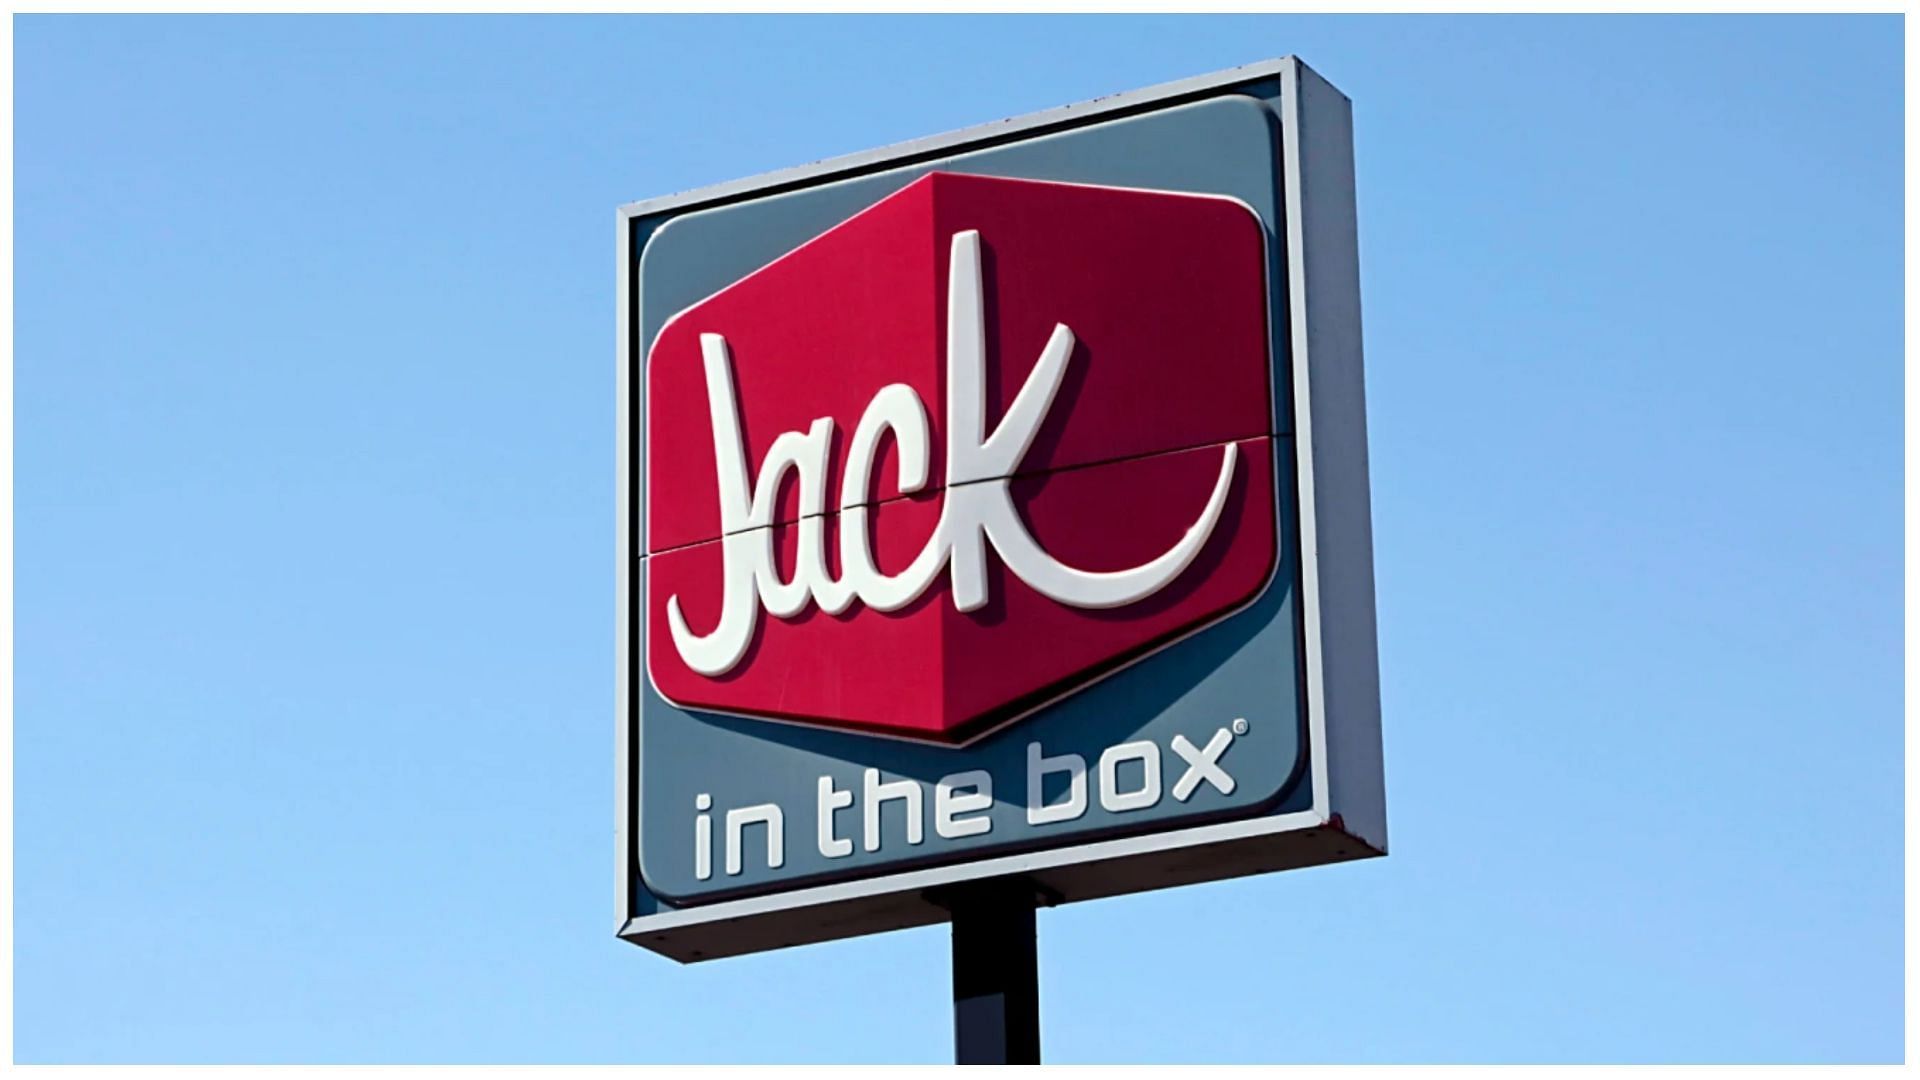 Jack in the Box restaurant sign outside a restaurant in the U.S. (Photo by: Don &amp; Melinda Crawford/Education Images/Universal Images Group via Getty Images)